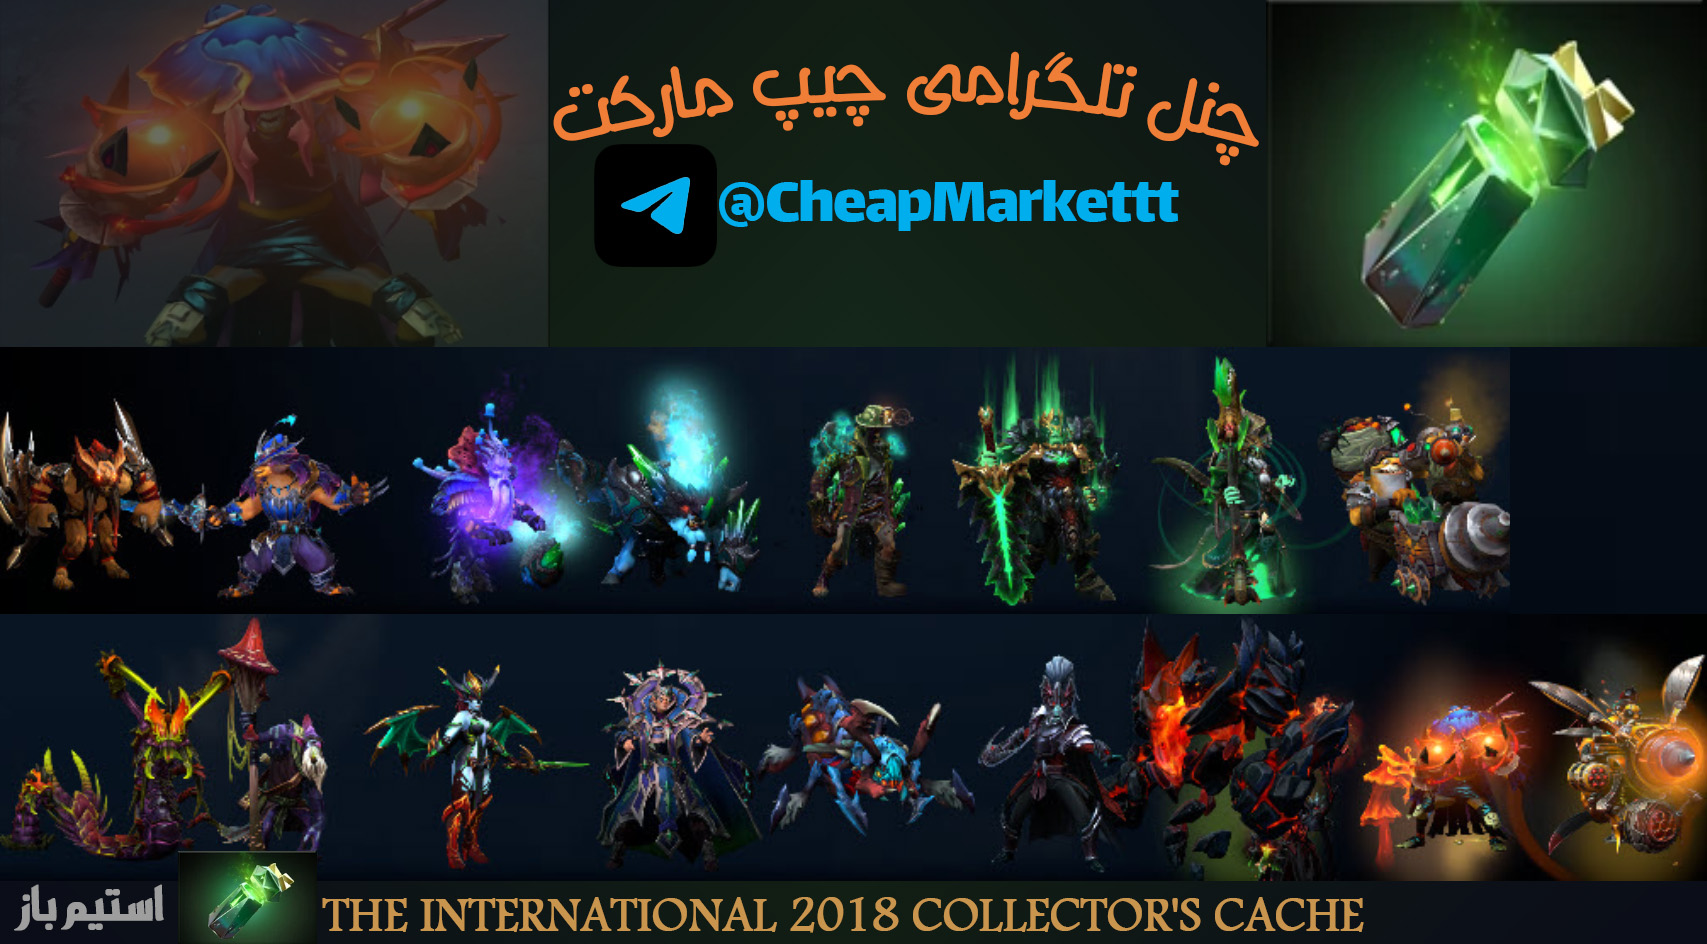 The International 2018 Collector's Cache